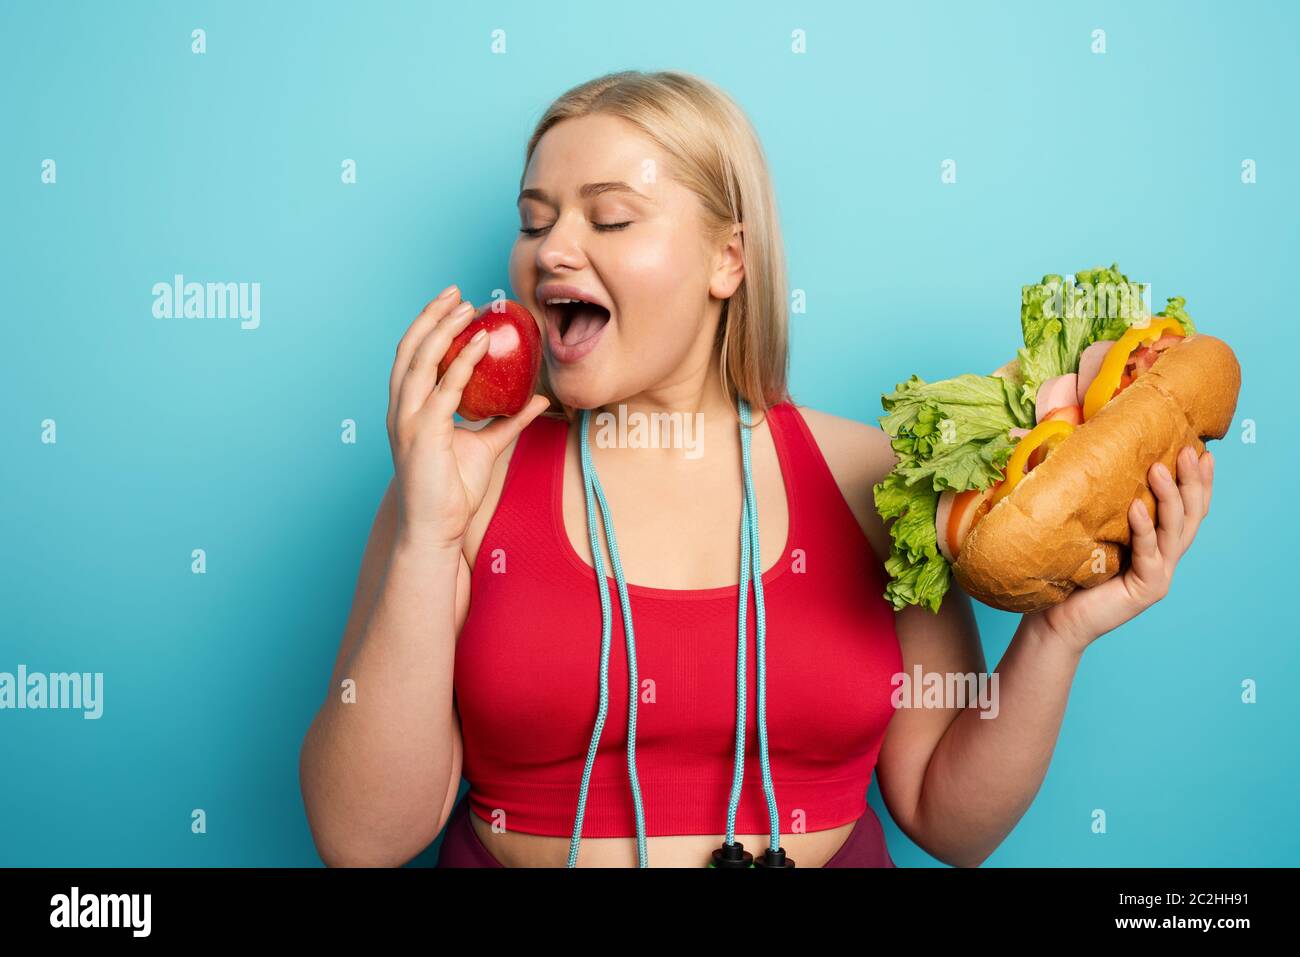 Fat girl prefers to eat an apple instead of a big sandwich. cyan background Stock Photo